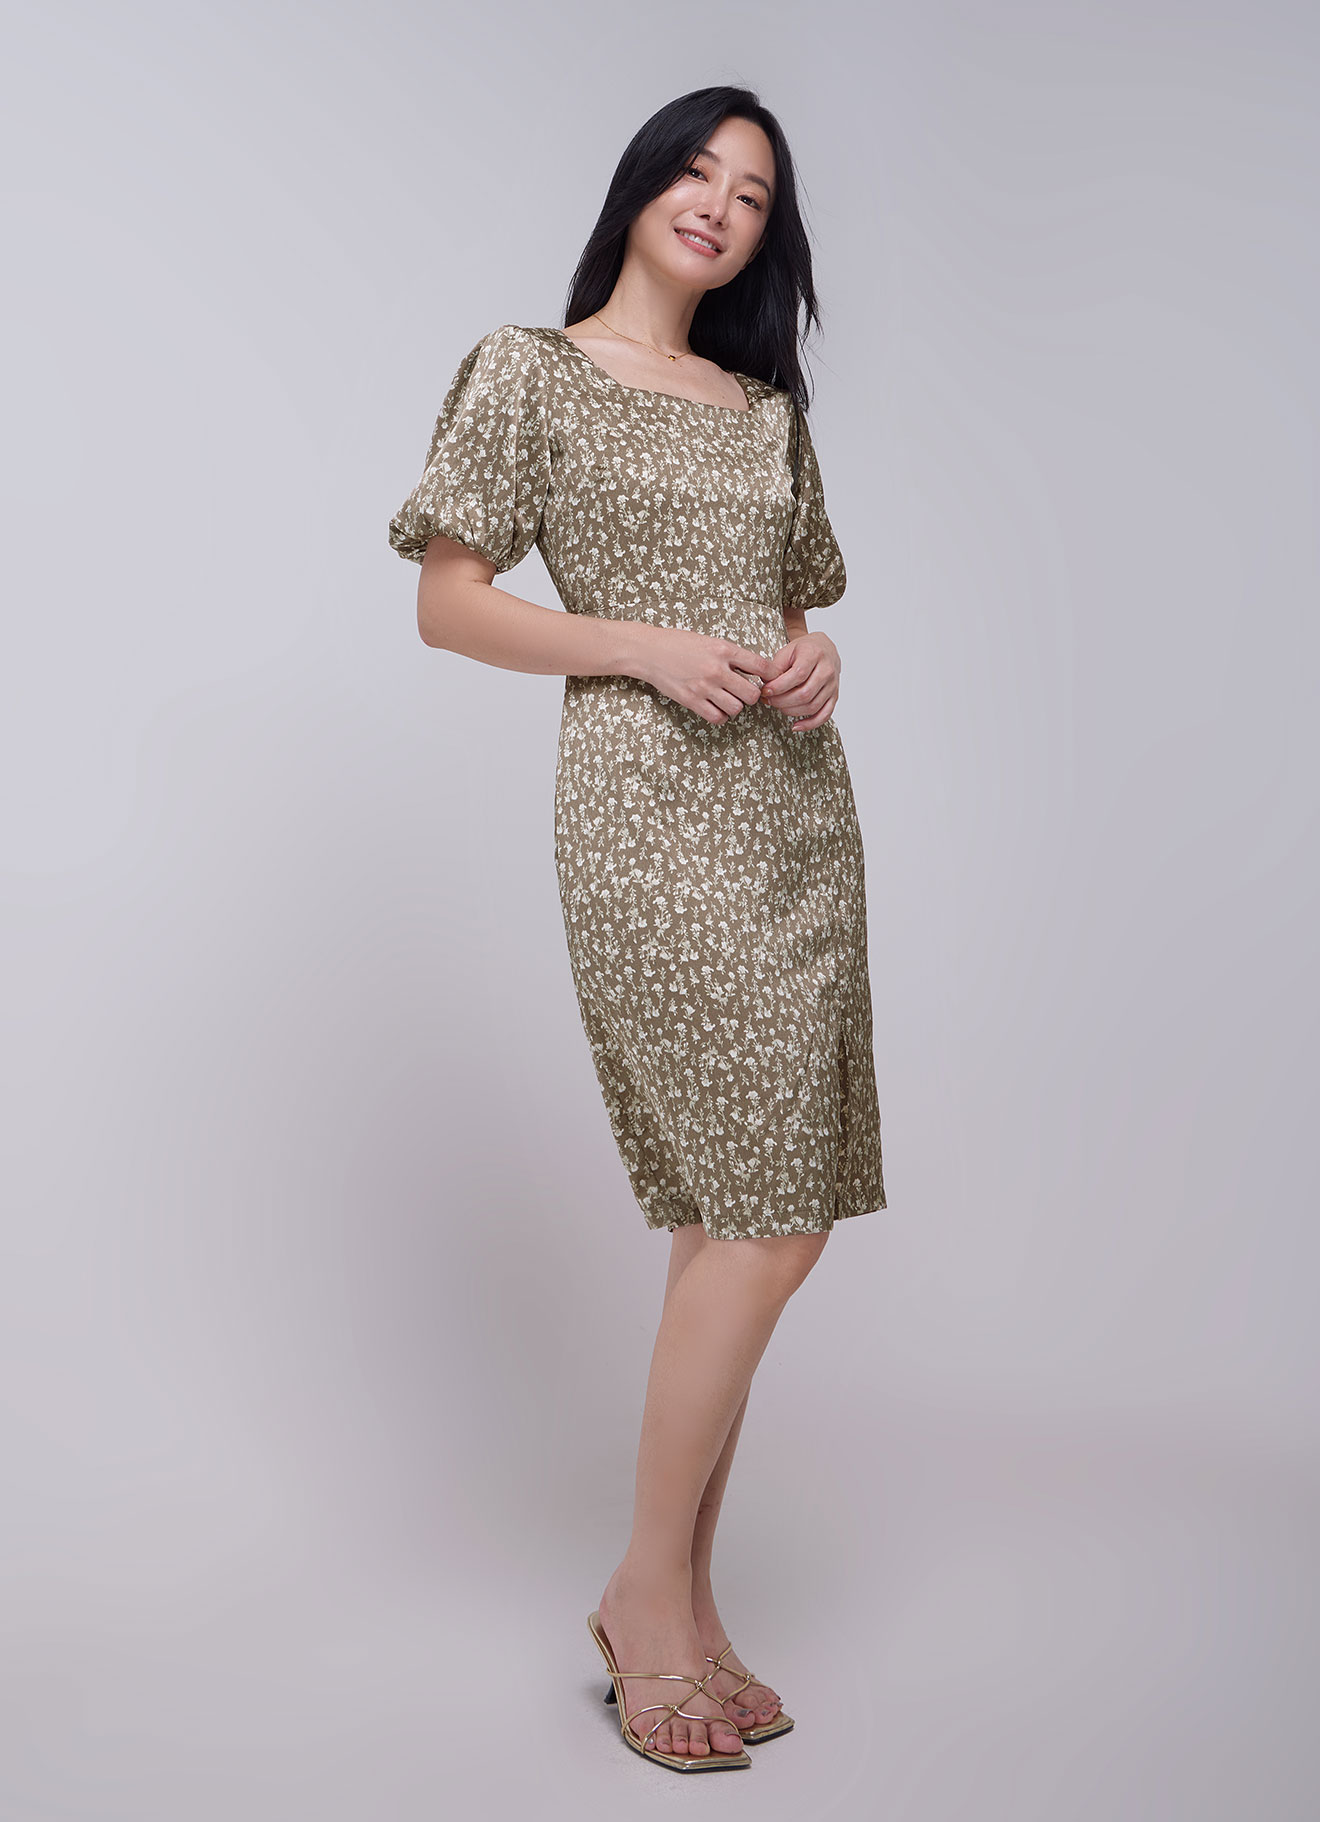 Silver-Mink by Floral Printed Dress